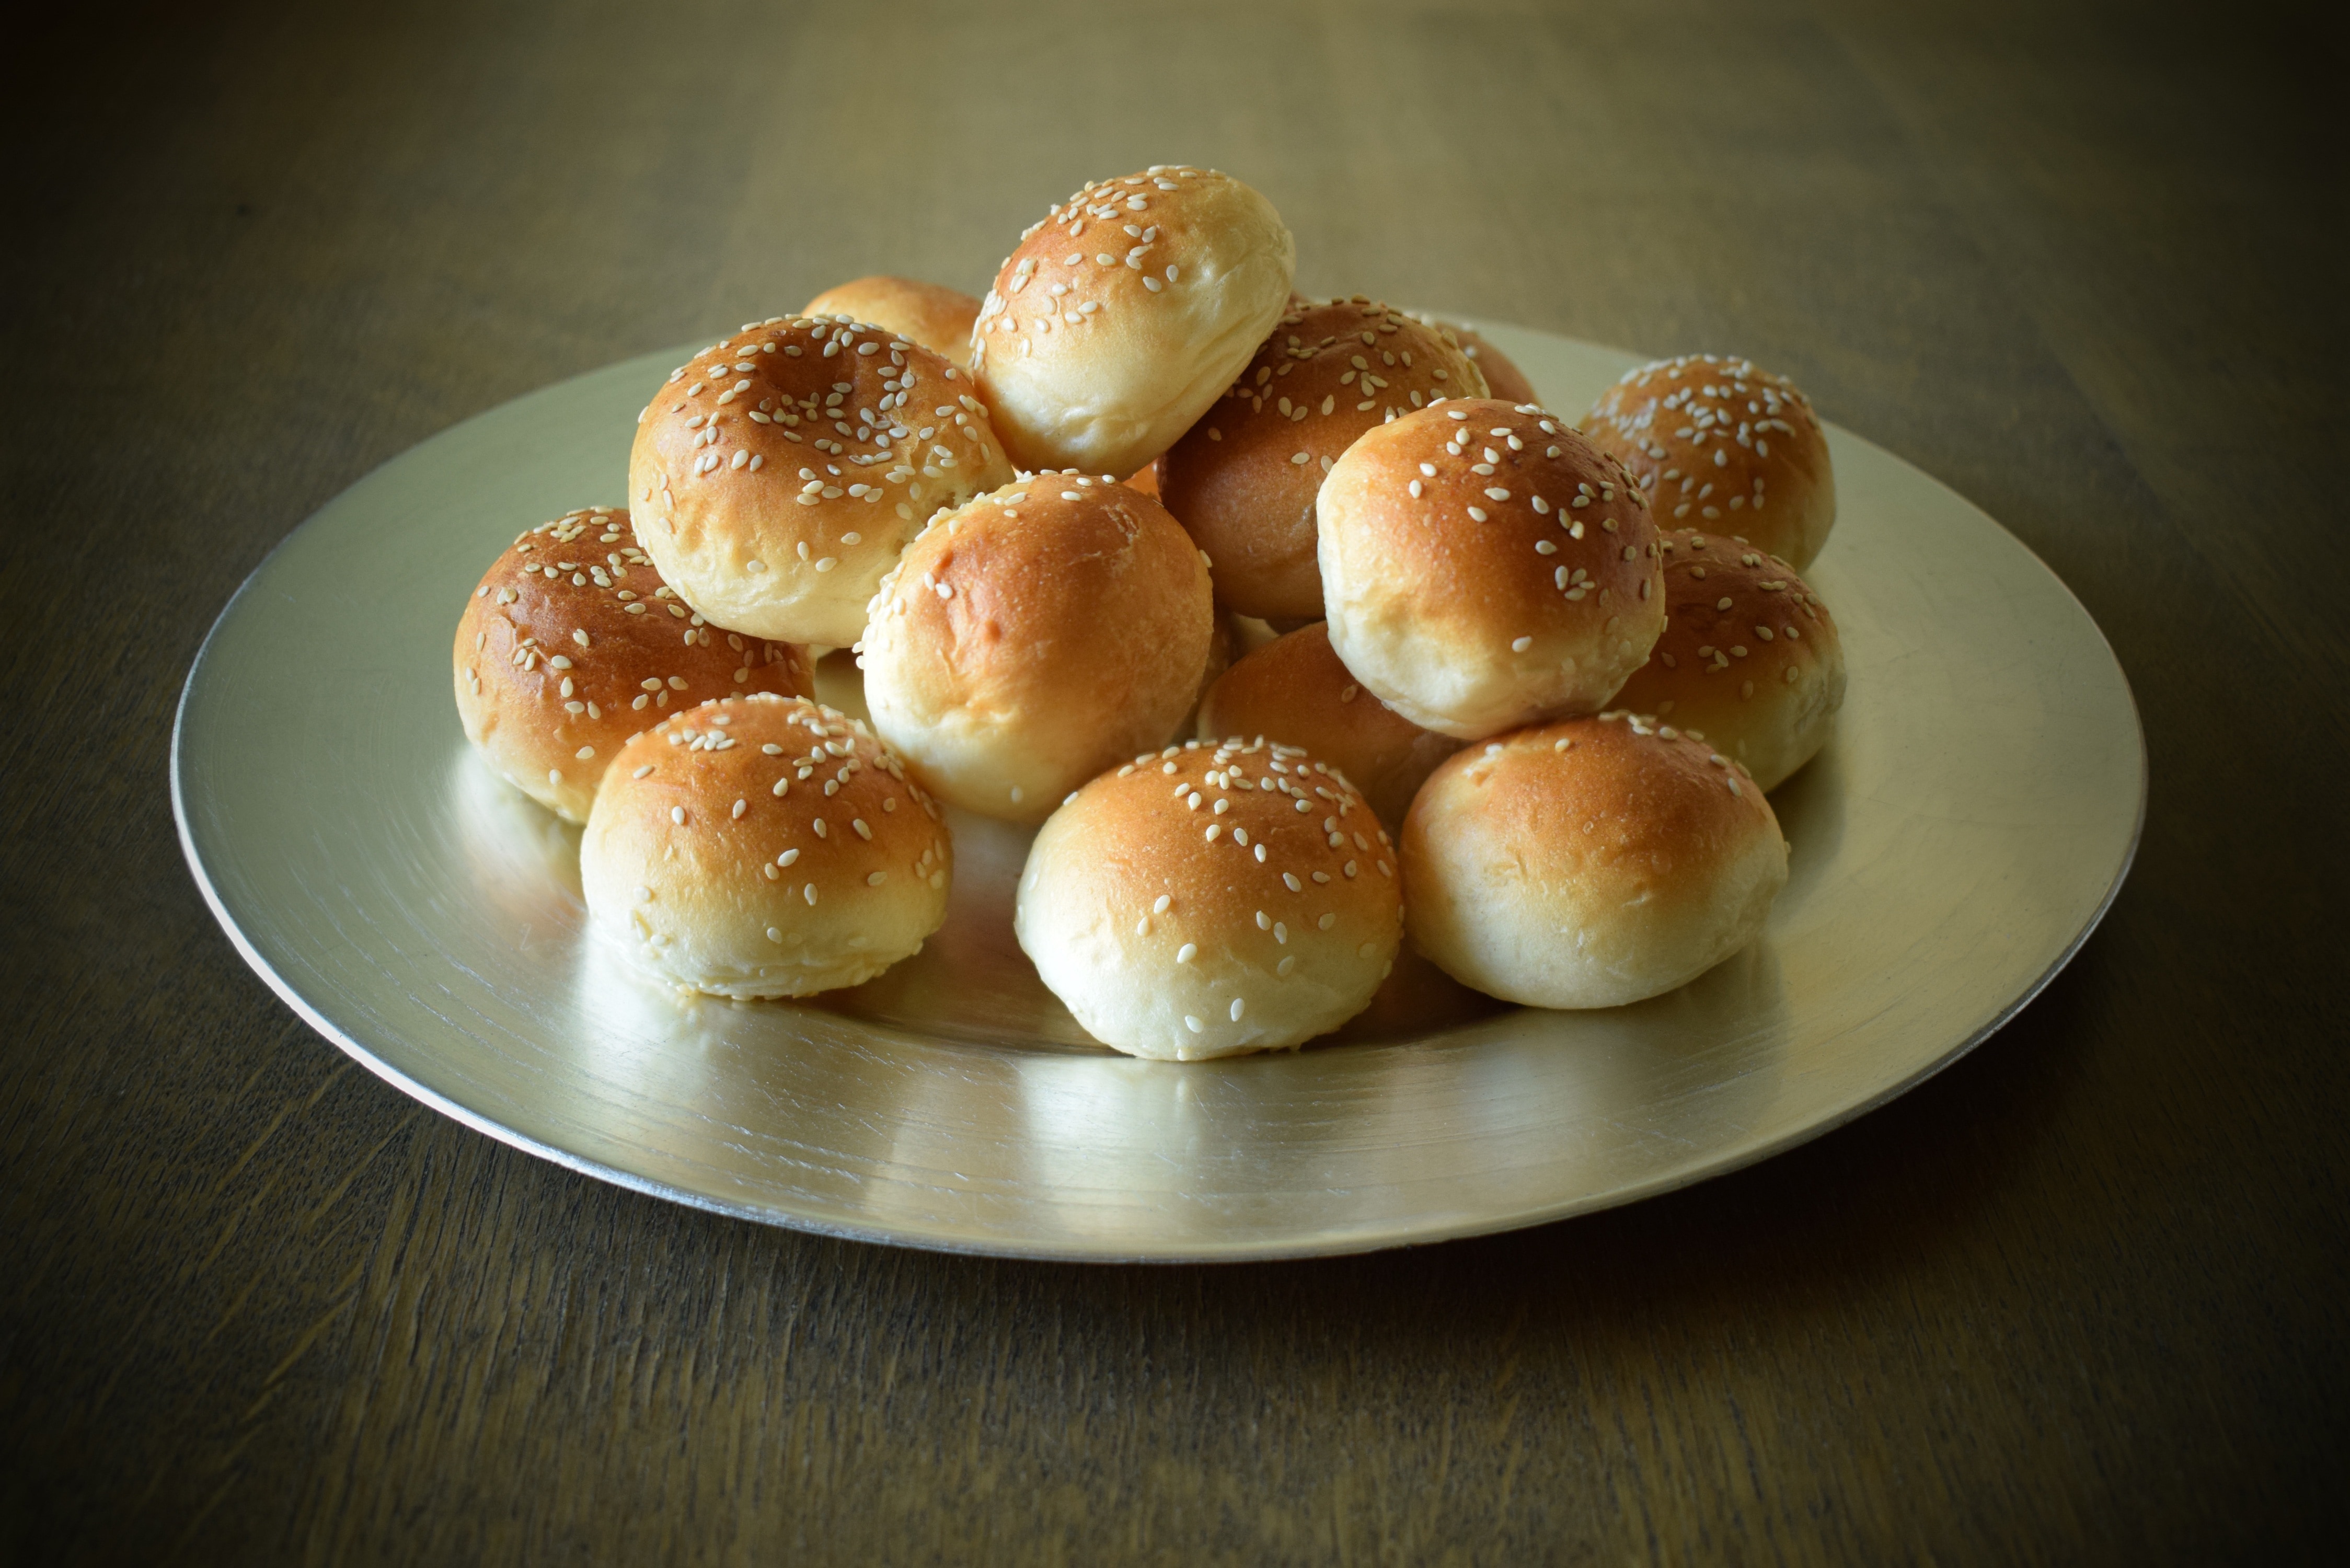 bread with sesame seeds toppings lot